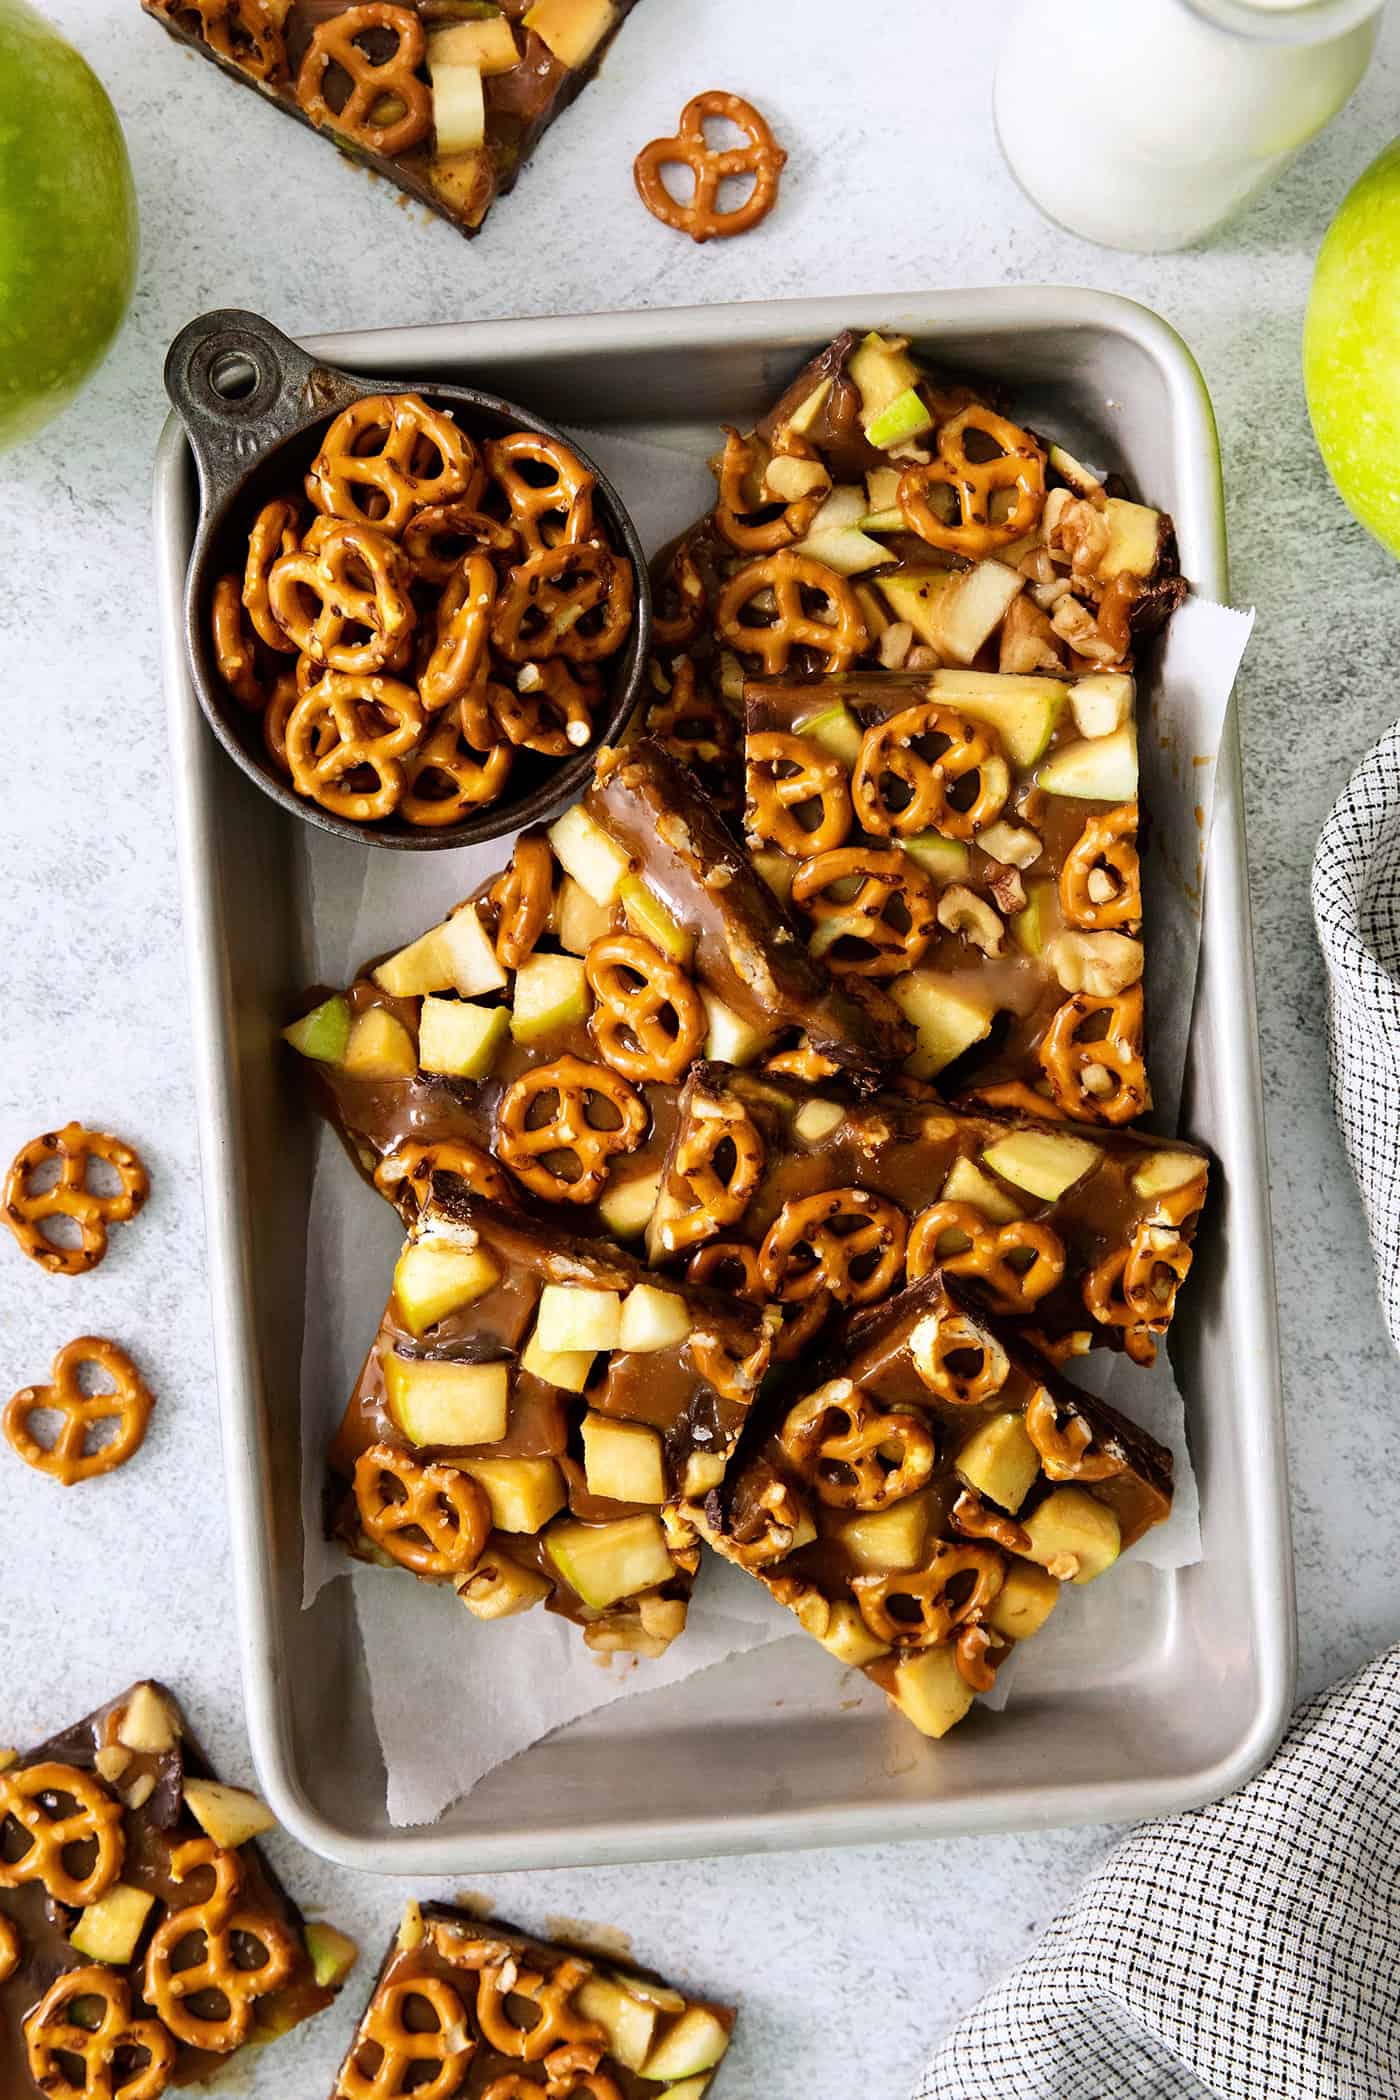 Cut up pieces of caramel apple bark are seen on a baking tray.